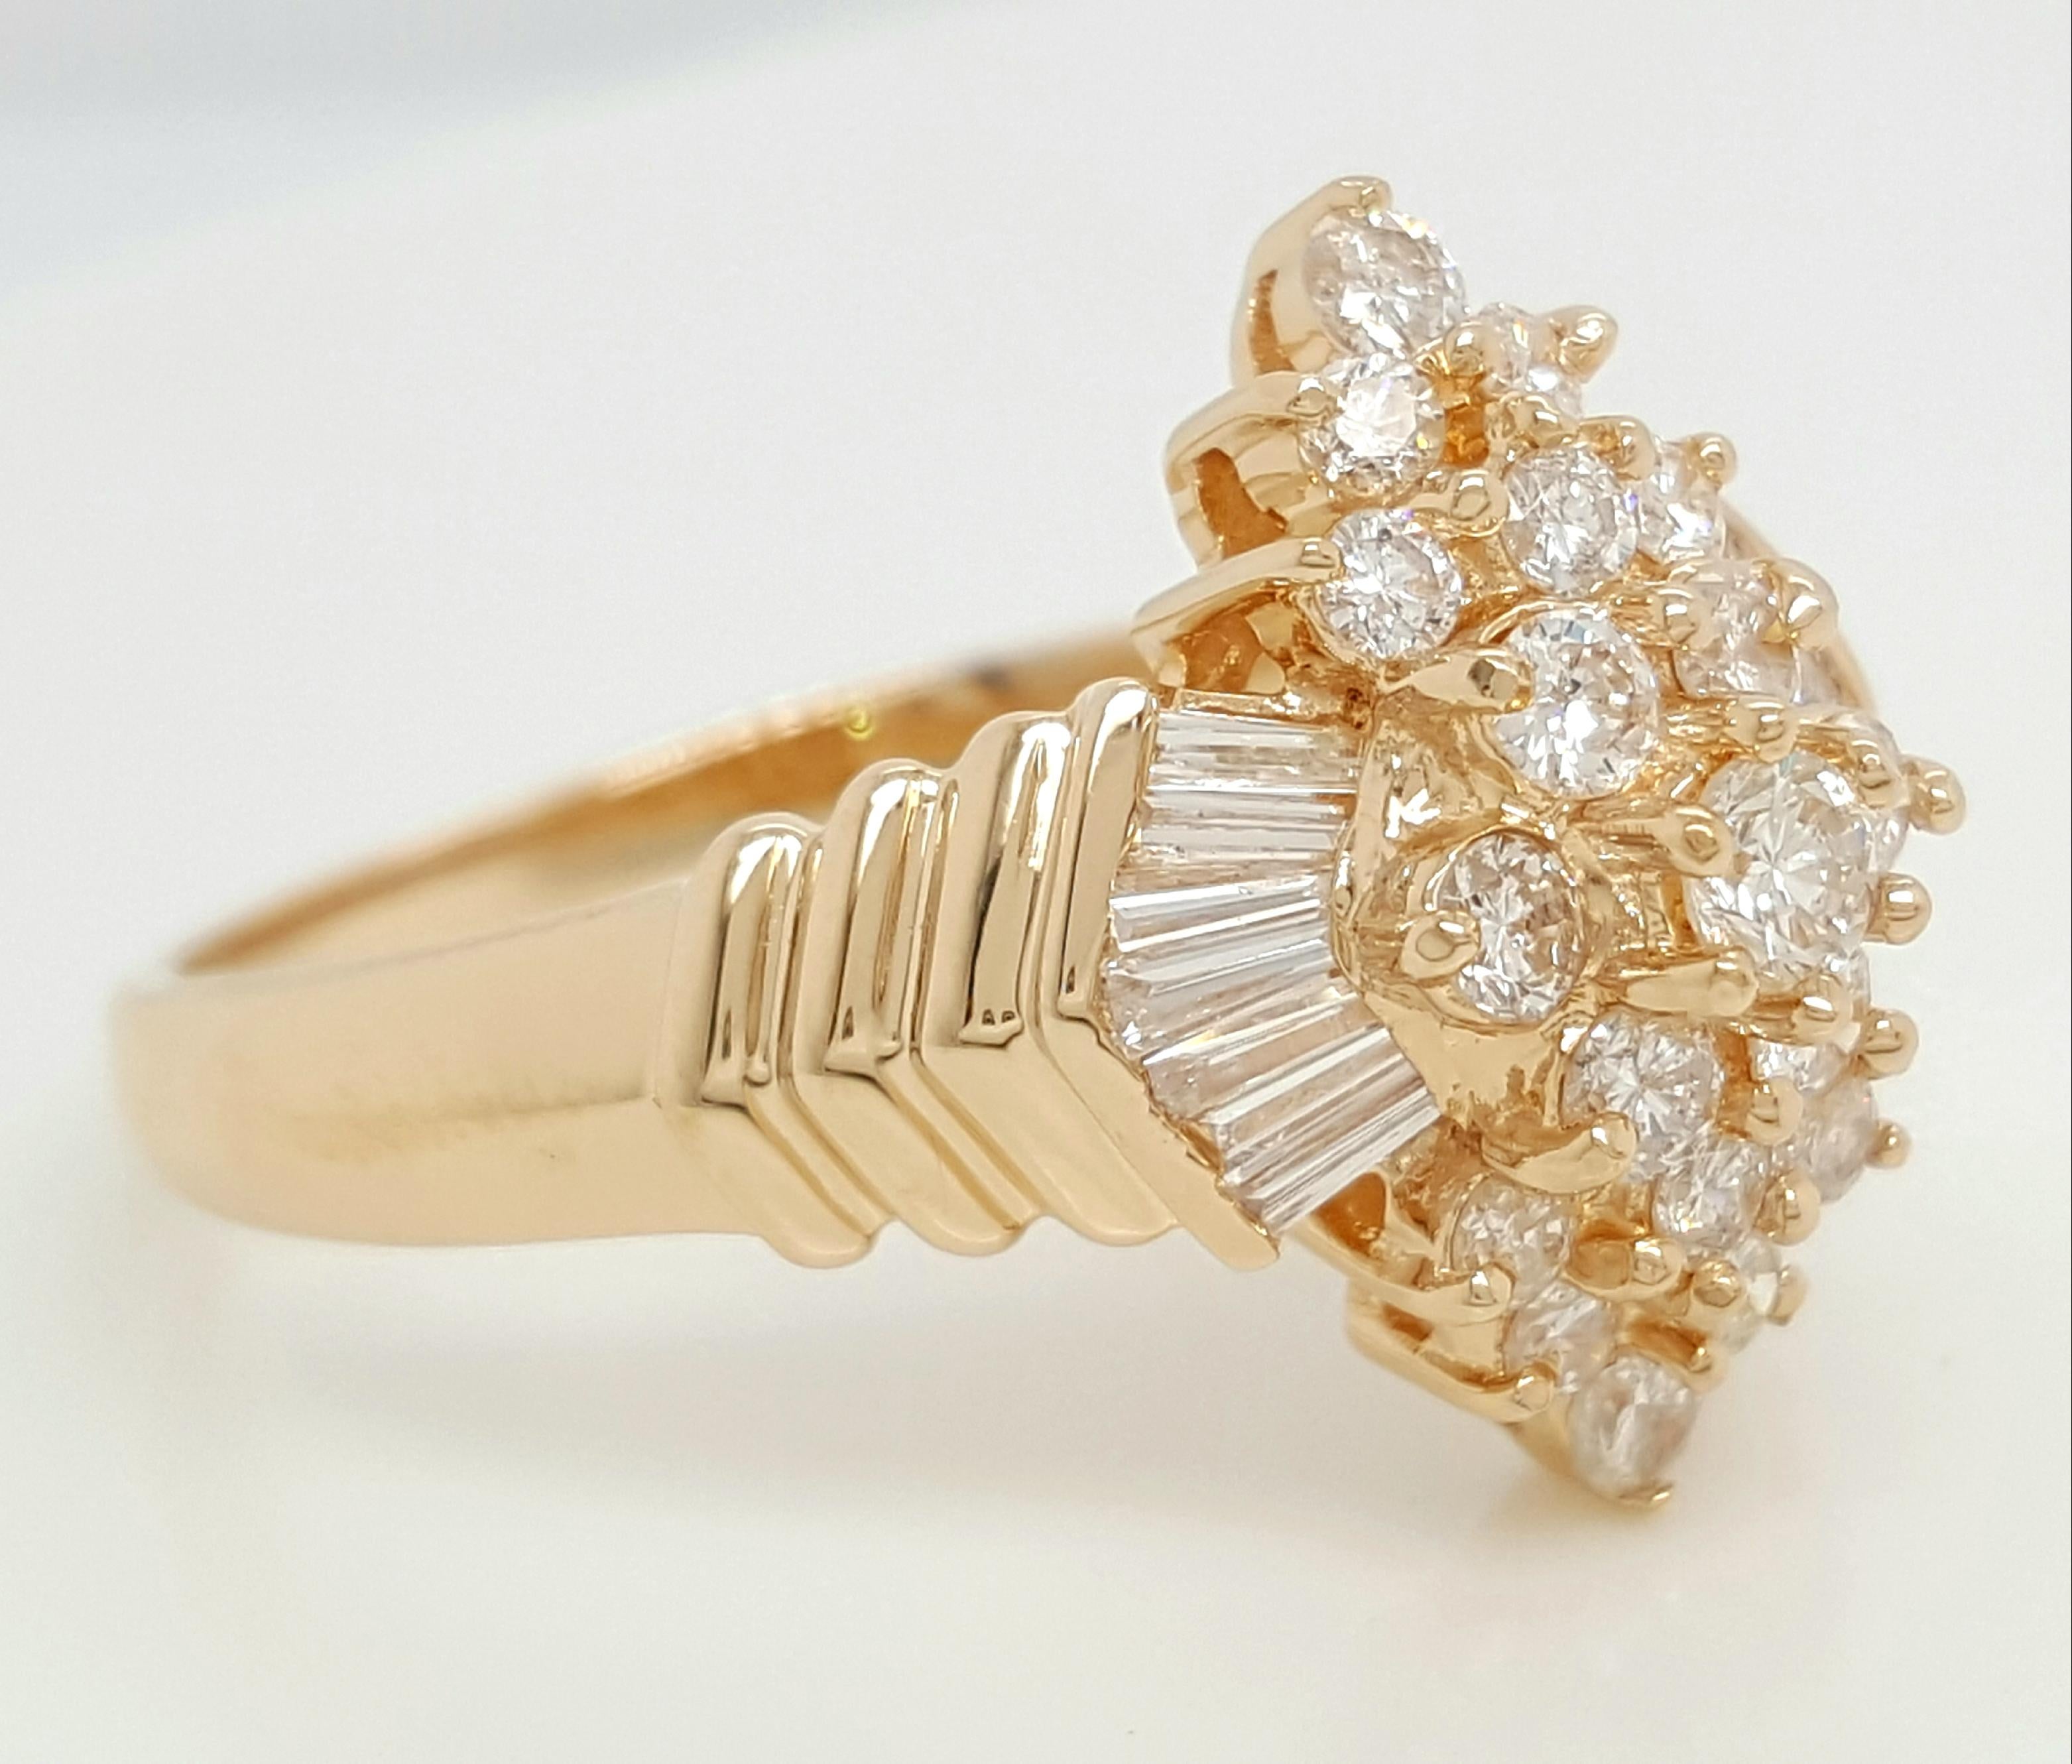 Item Details: 
Ring Size: 10.25
Metal Type: 18K Yellow Gold
Weight: 6.3 grams
Hallmark: 18KP
Engraving: none
Width: 16.7mm at head tapering to 2.2 mm at bottom of shank
Finger to Top of Stone Measurement: 8.1 mm

Round Diamond Details:
Count: